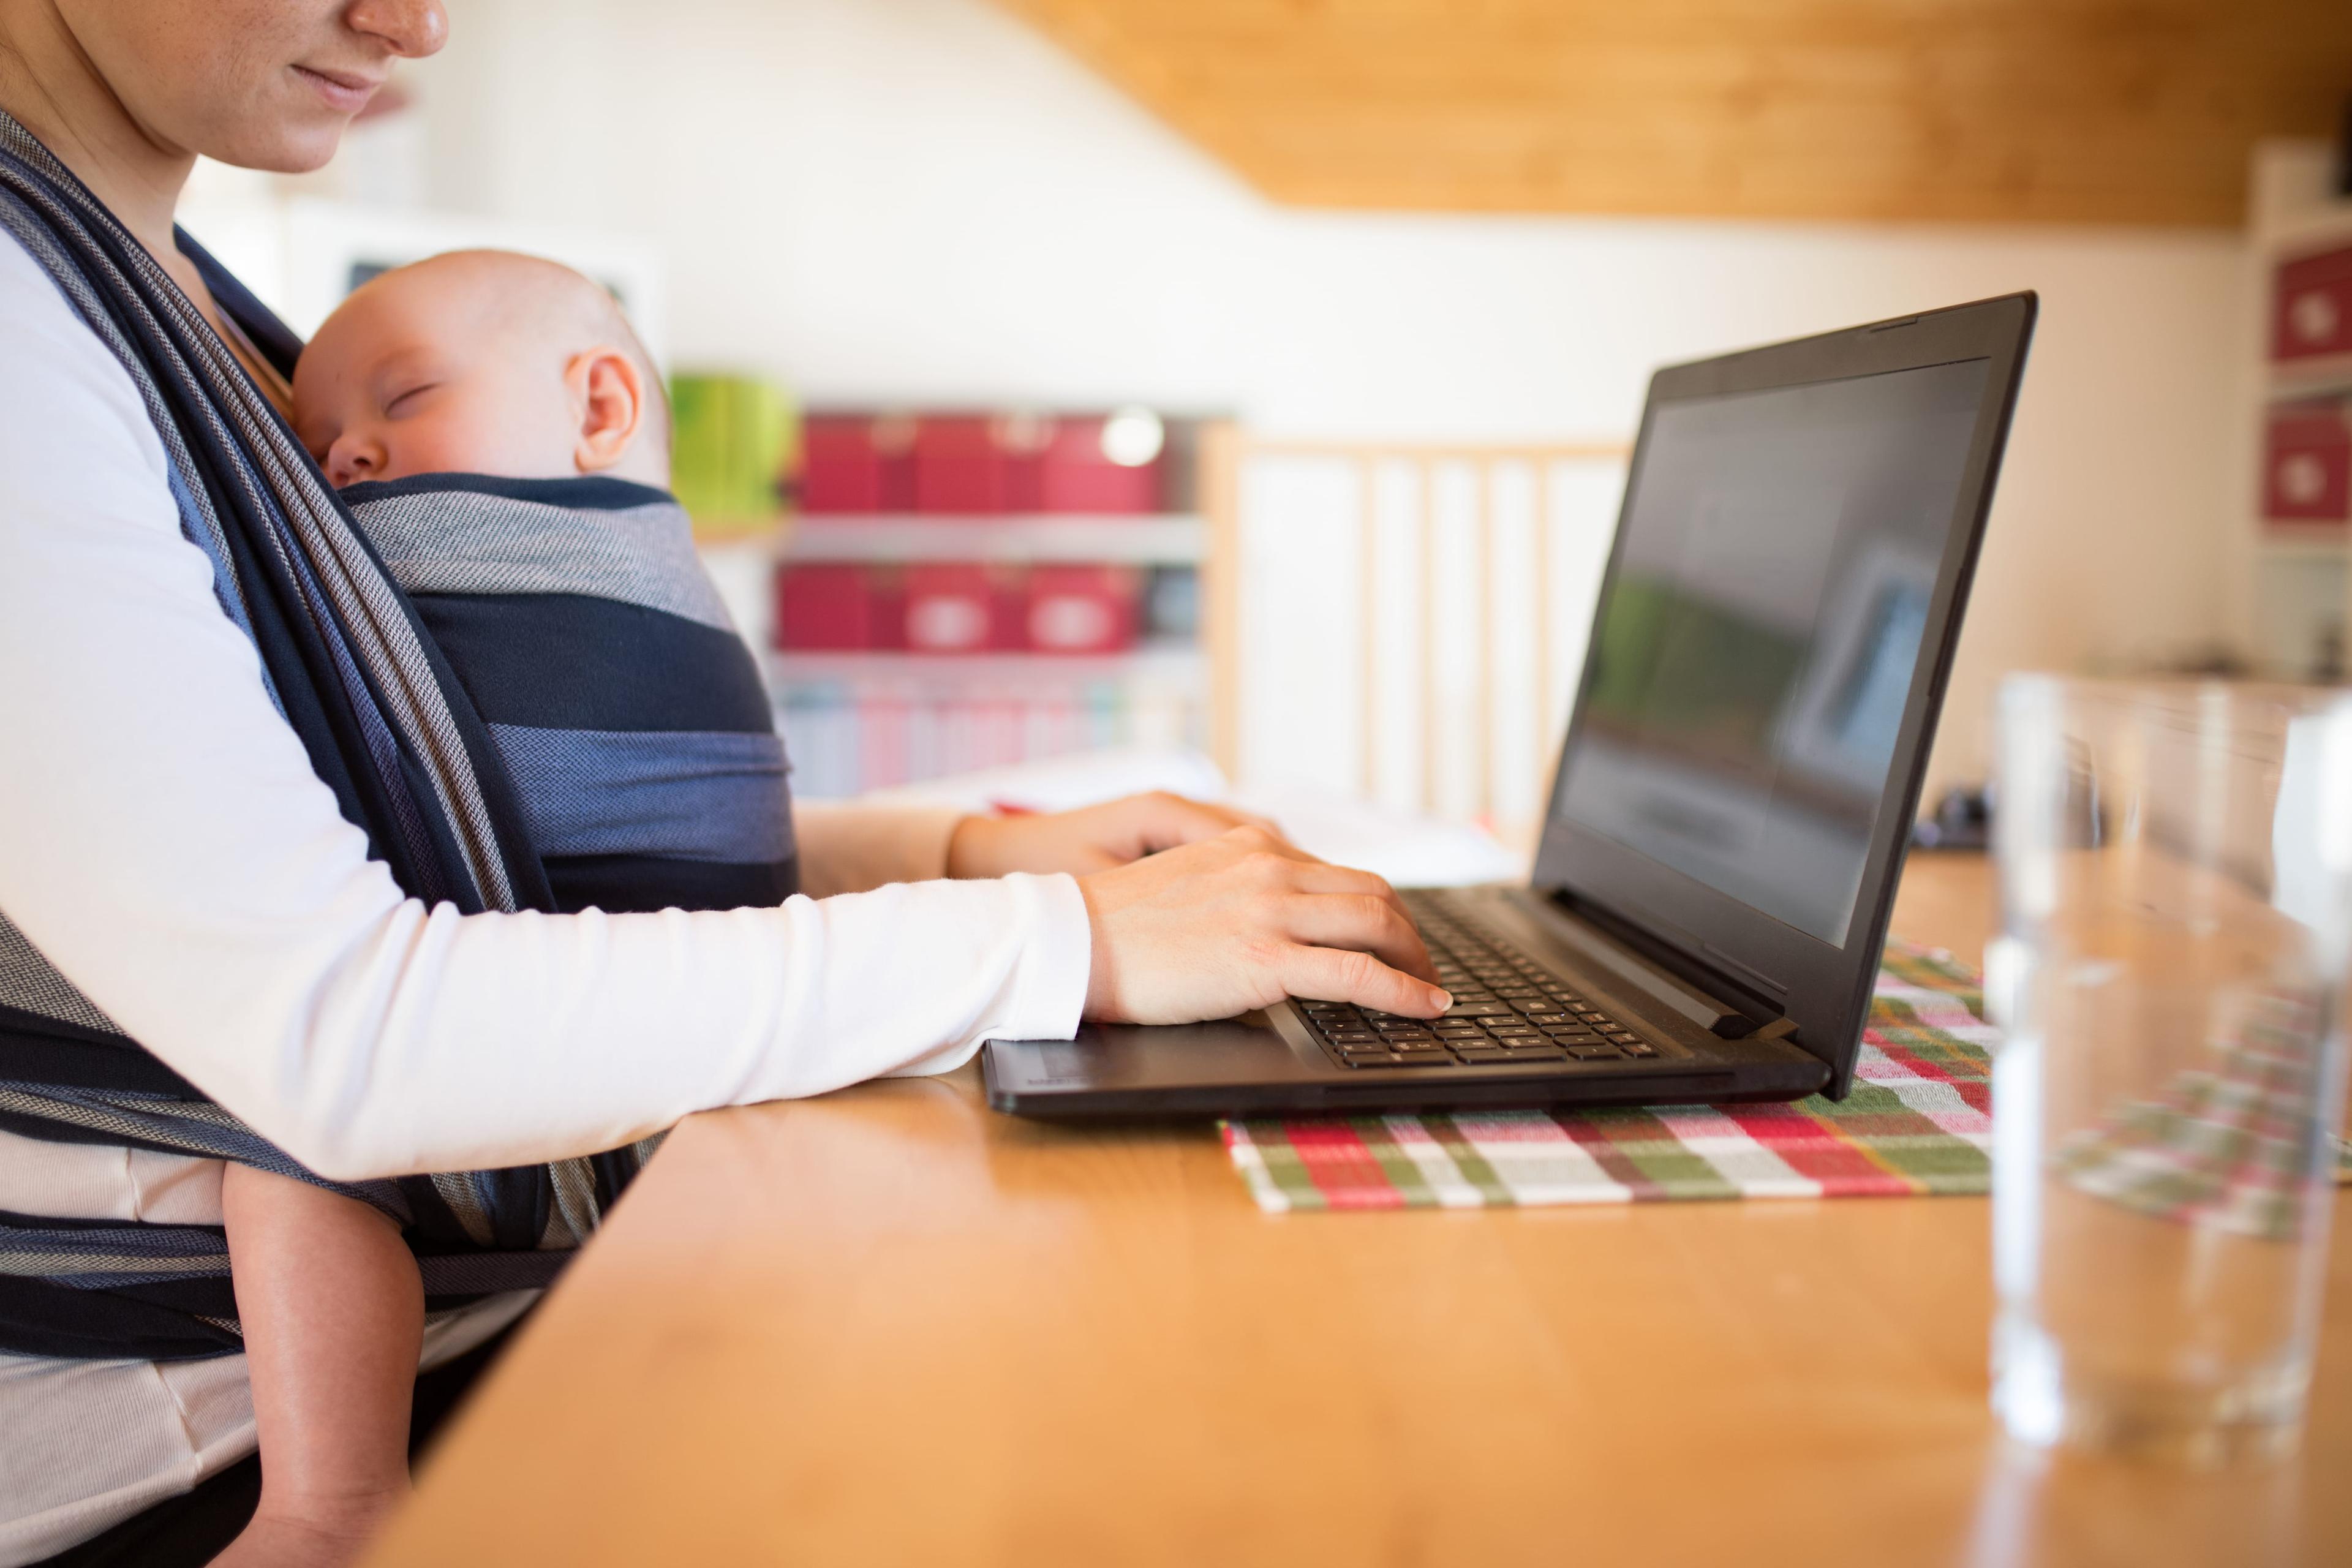 A woman with a baby in a baby carrier working on a laptop.